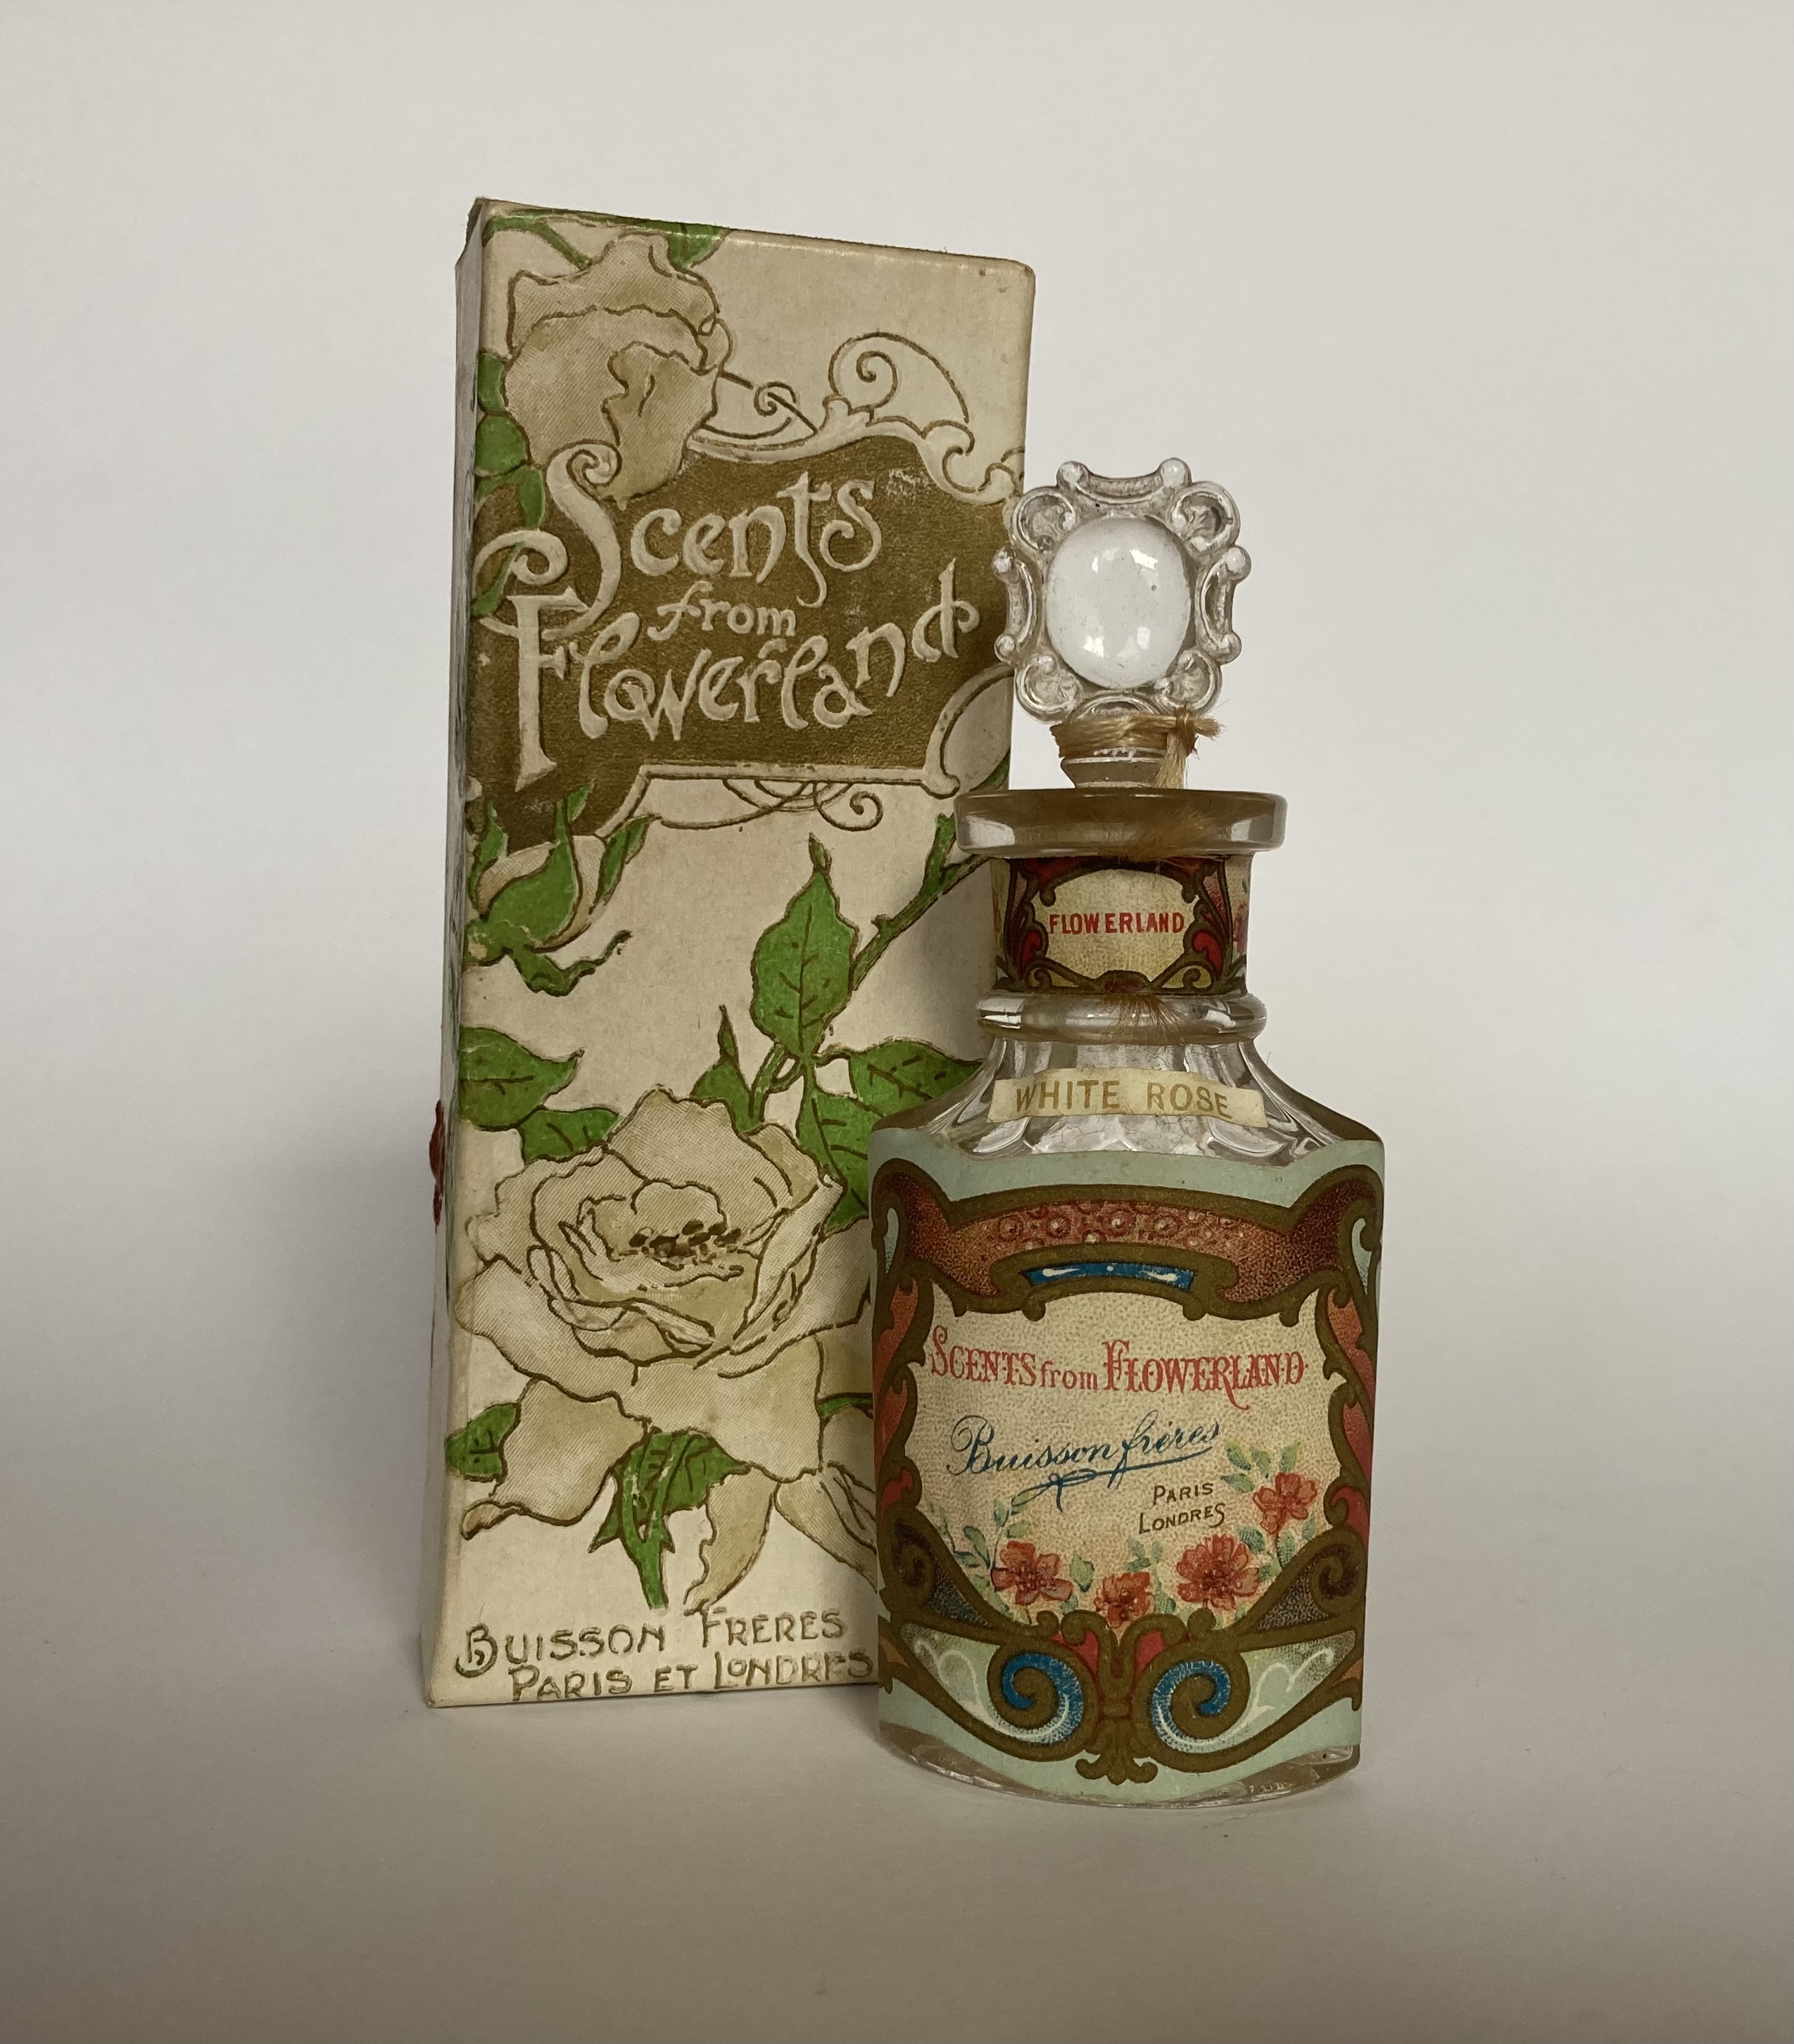 Buisson Freres - Scents from Flowerland